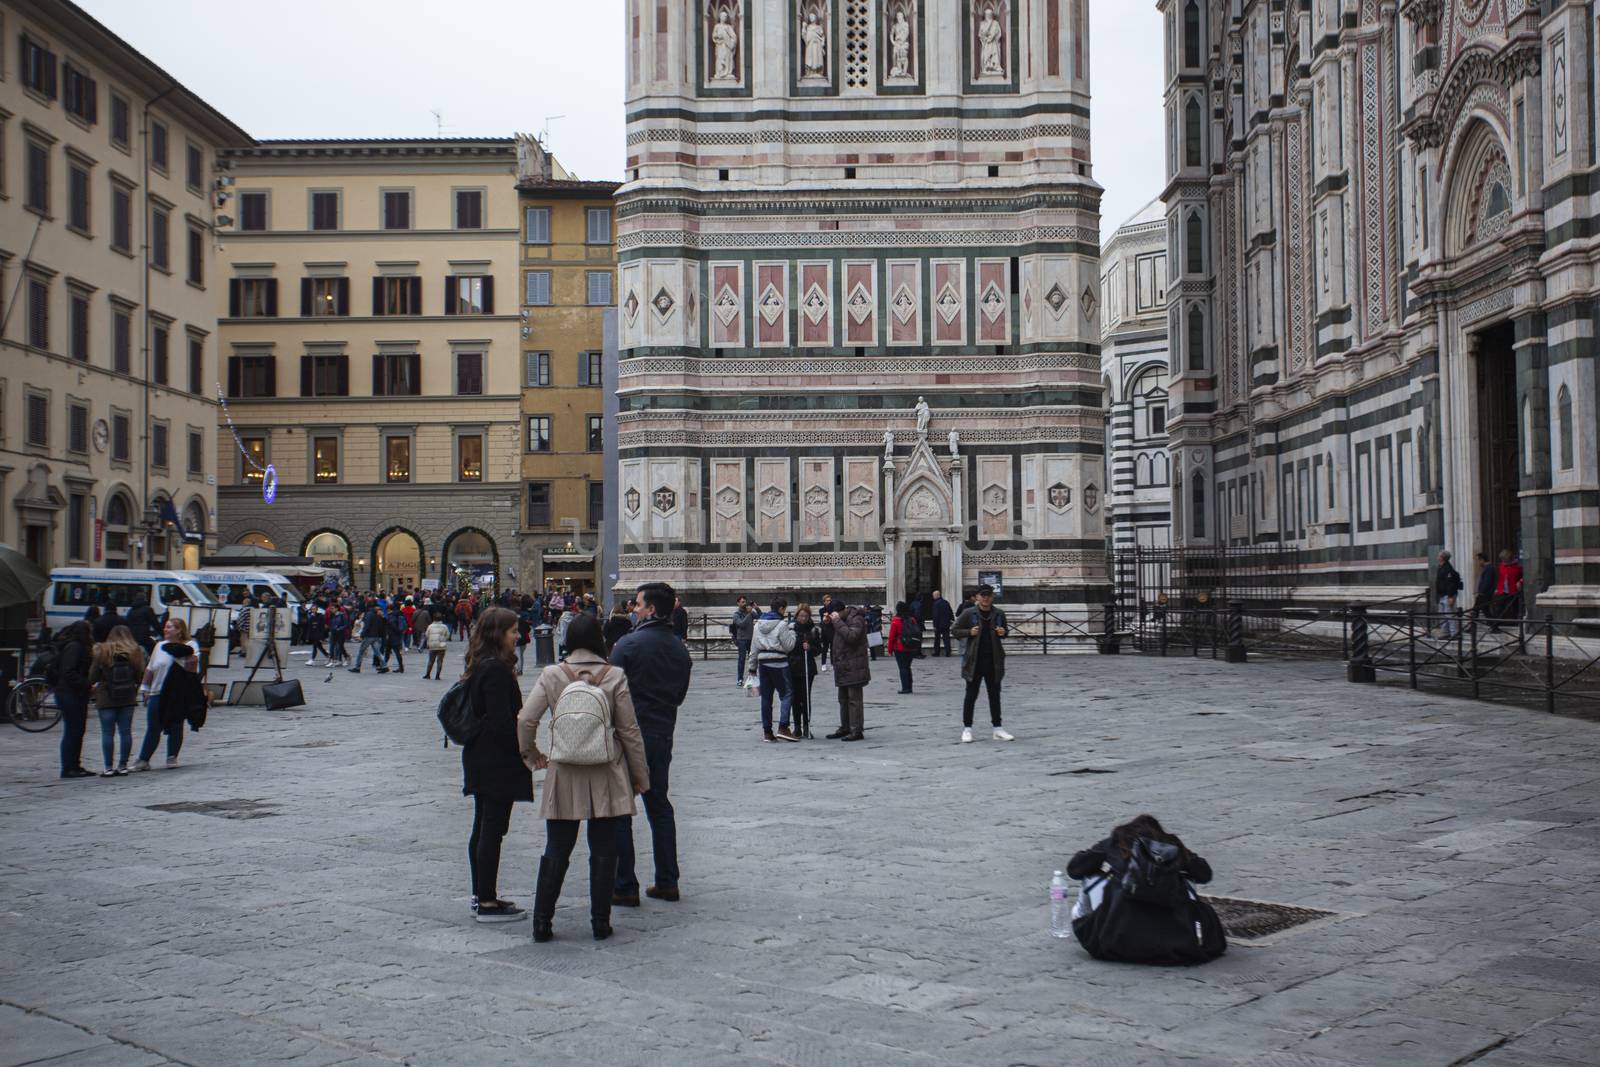 Piazza del Duomo in Florence with tourists 20 by pippocarlot